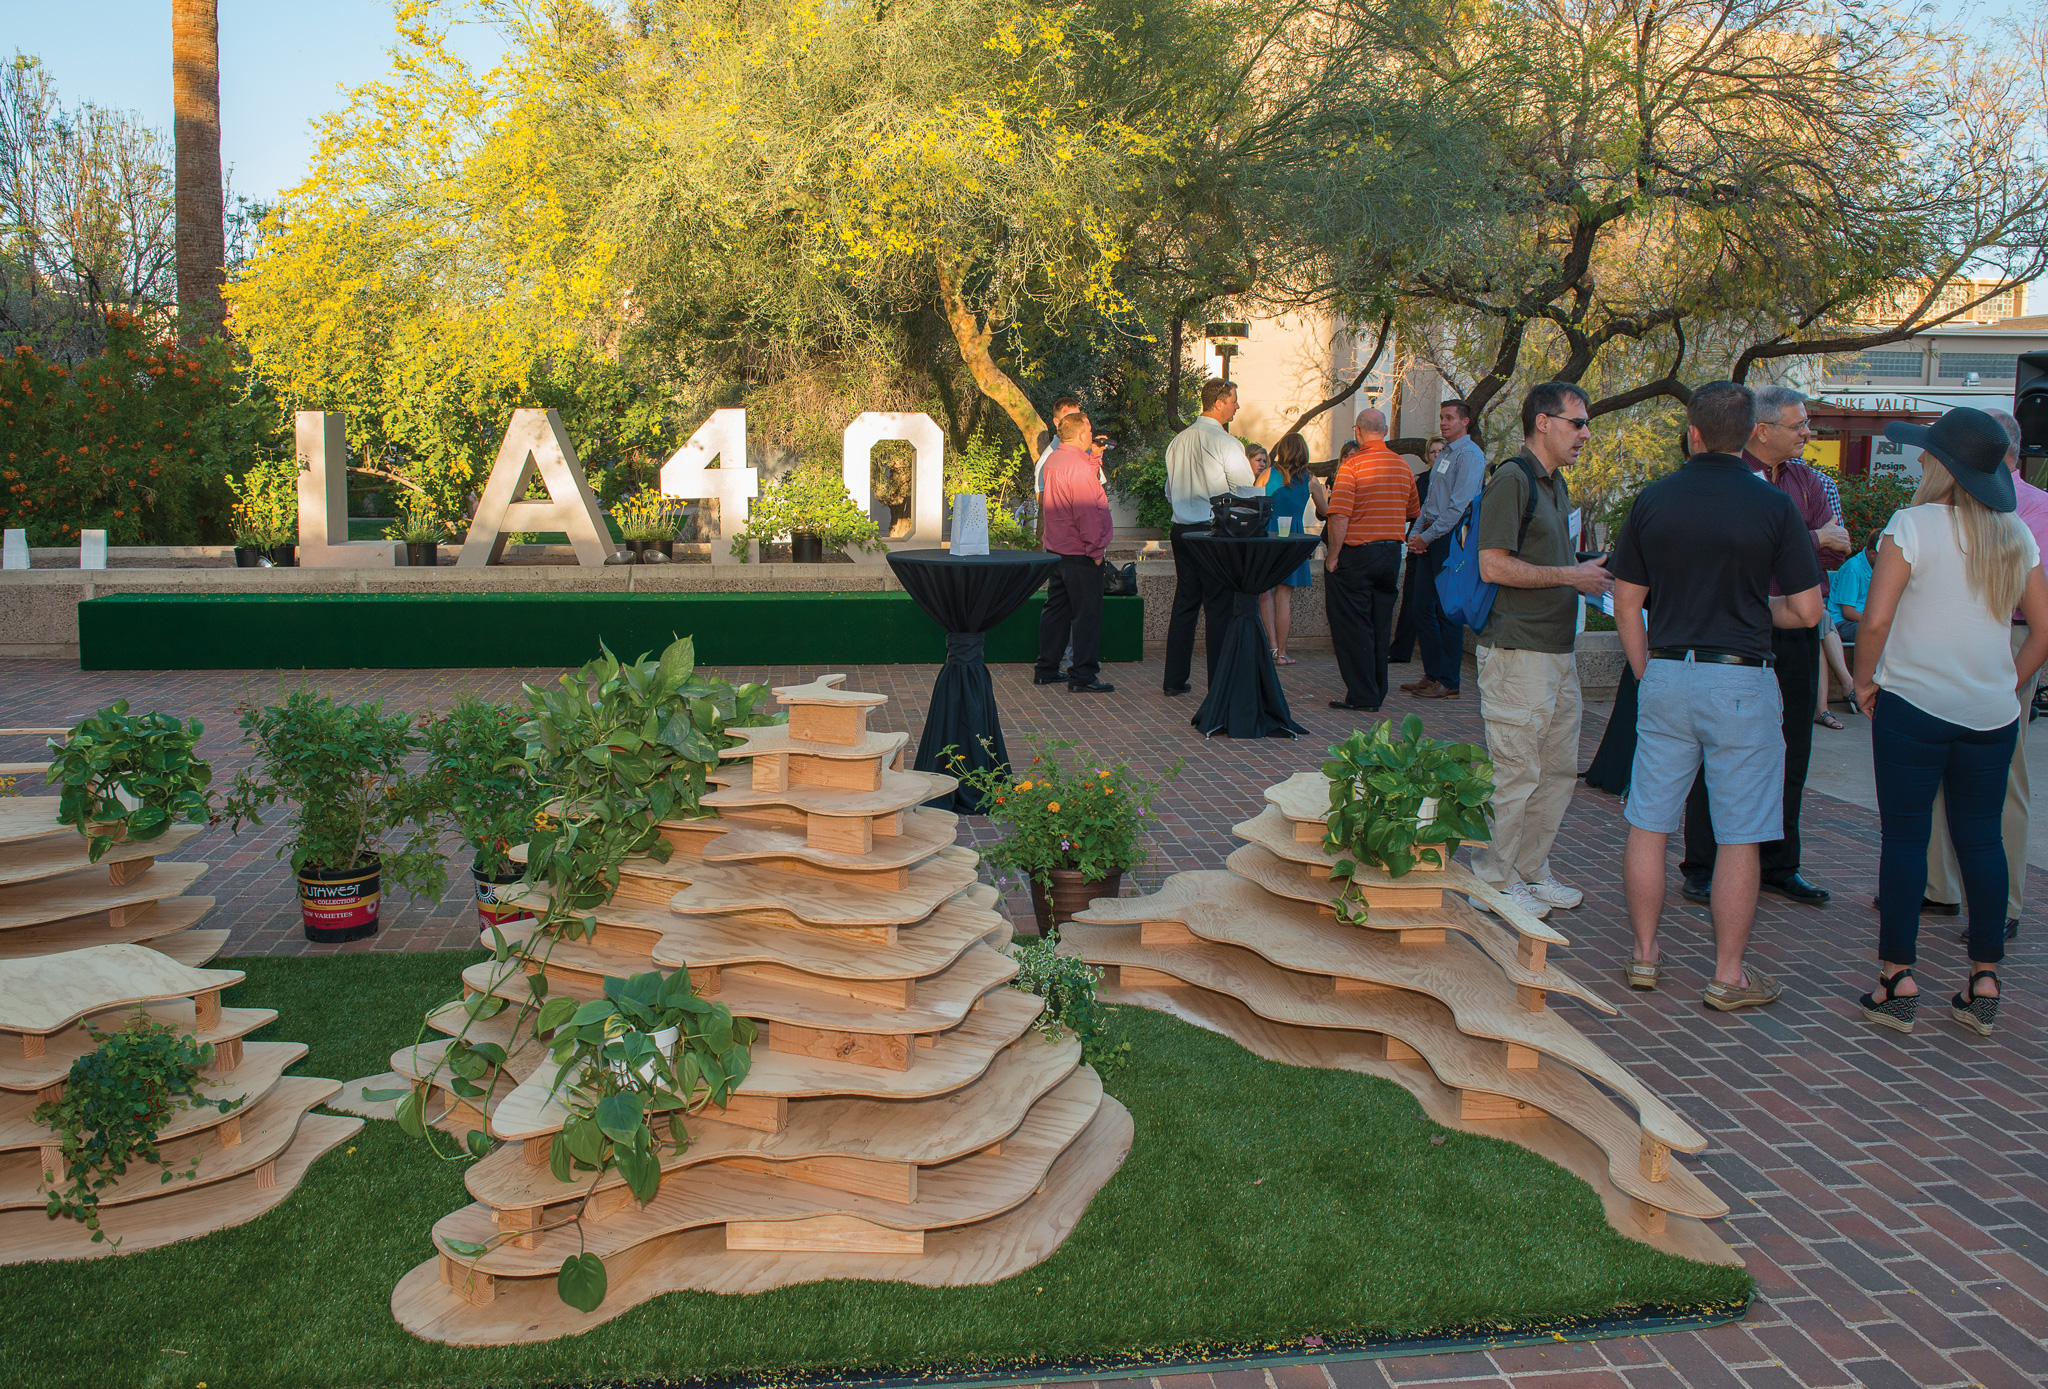 outdoor gathering celebrating 40 years of landscape architecture at ASU